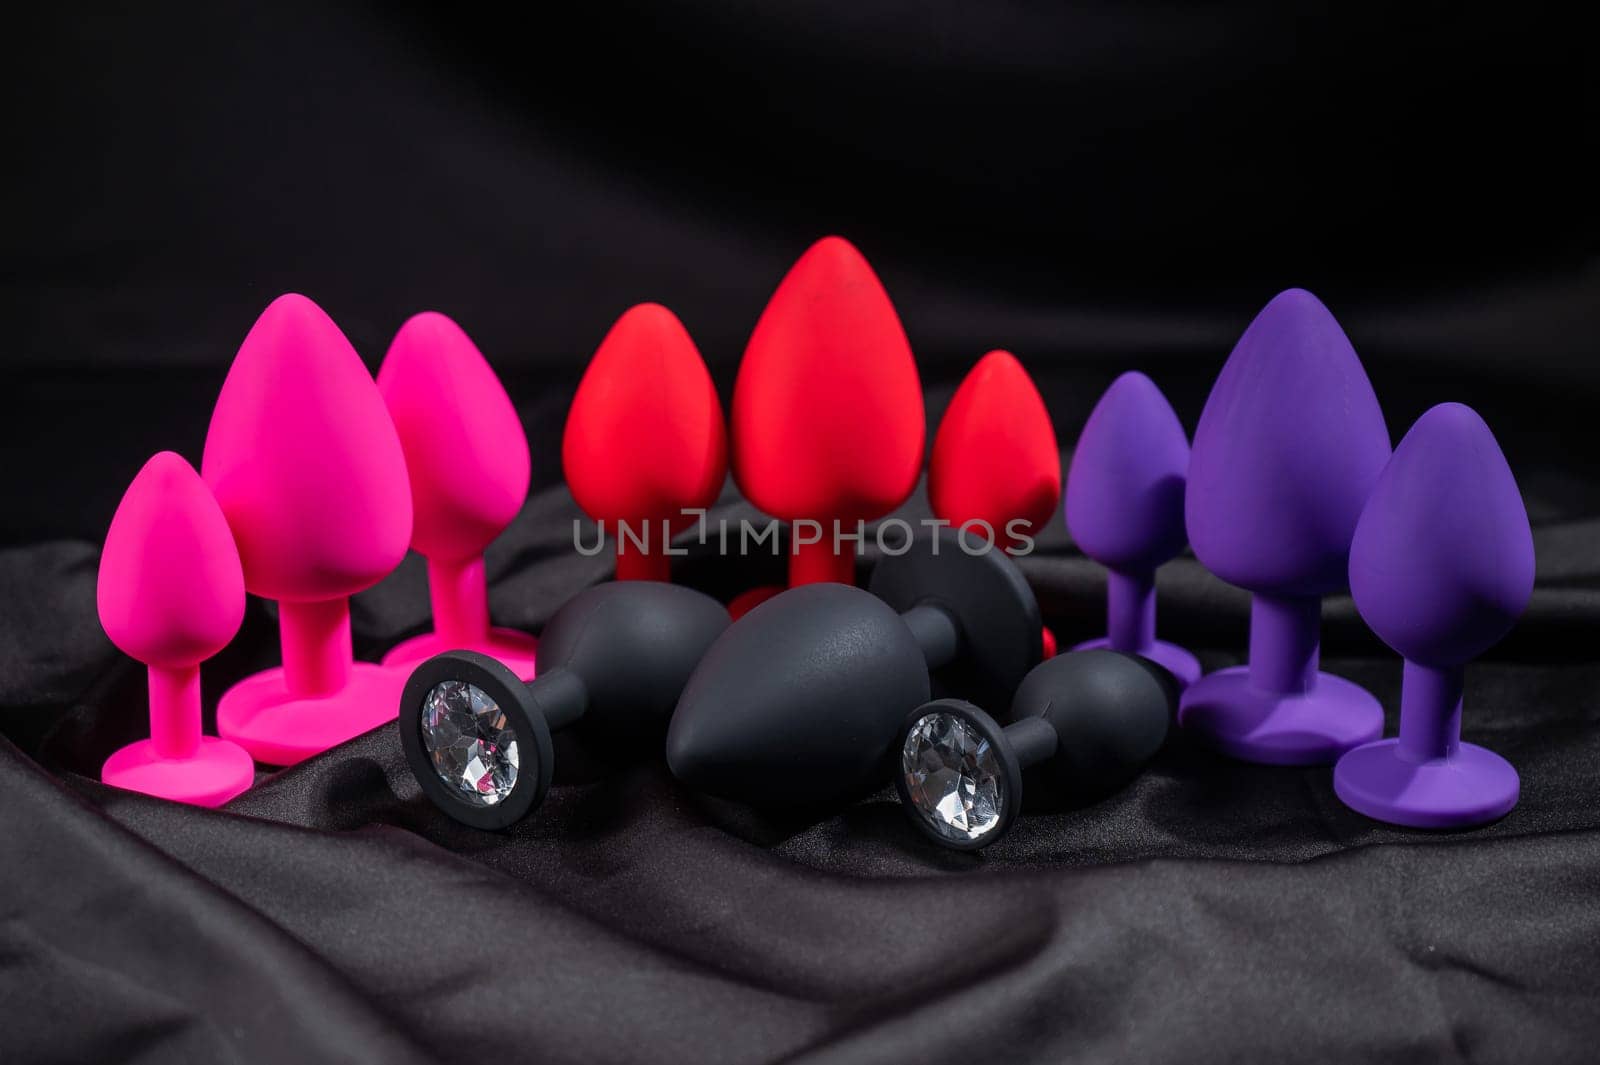 A set of silicone anal plugs in different colors and sizes on a black silk sheet